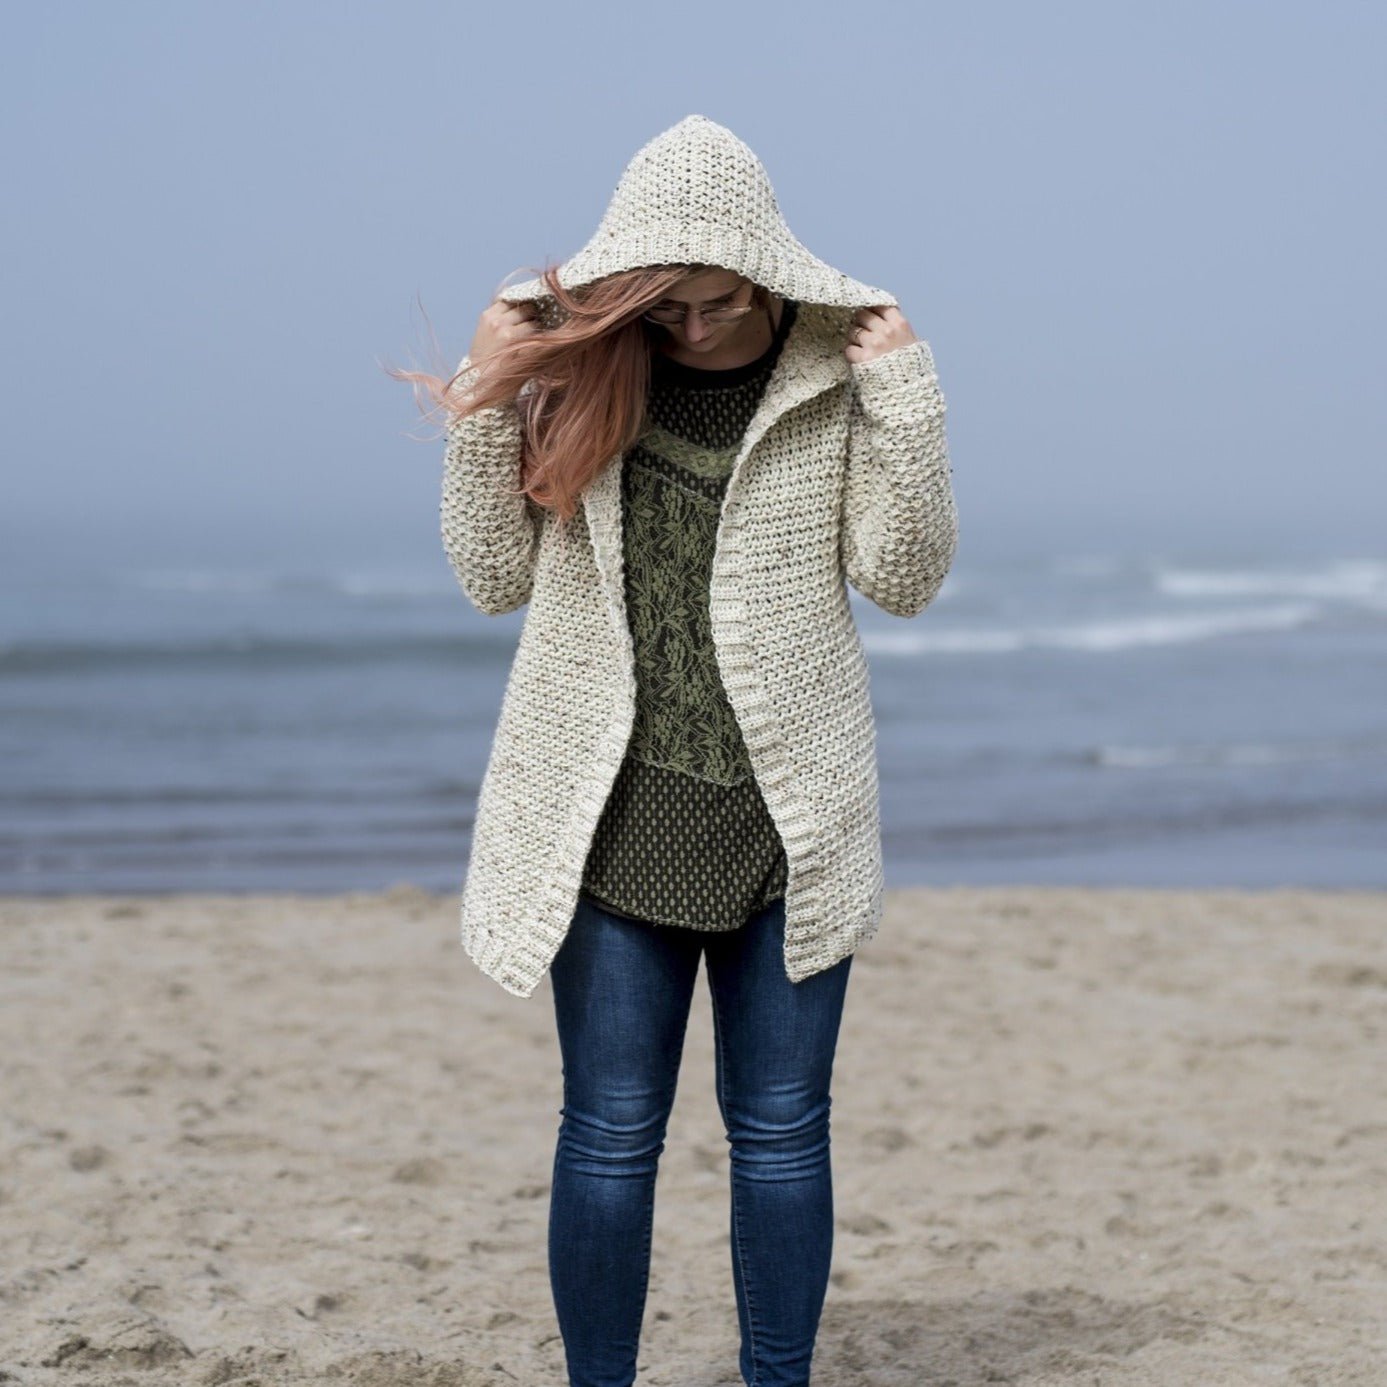 Crochet Pattern: The Albatross Hooded Cardigan – Made by Hailey Bailey